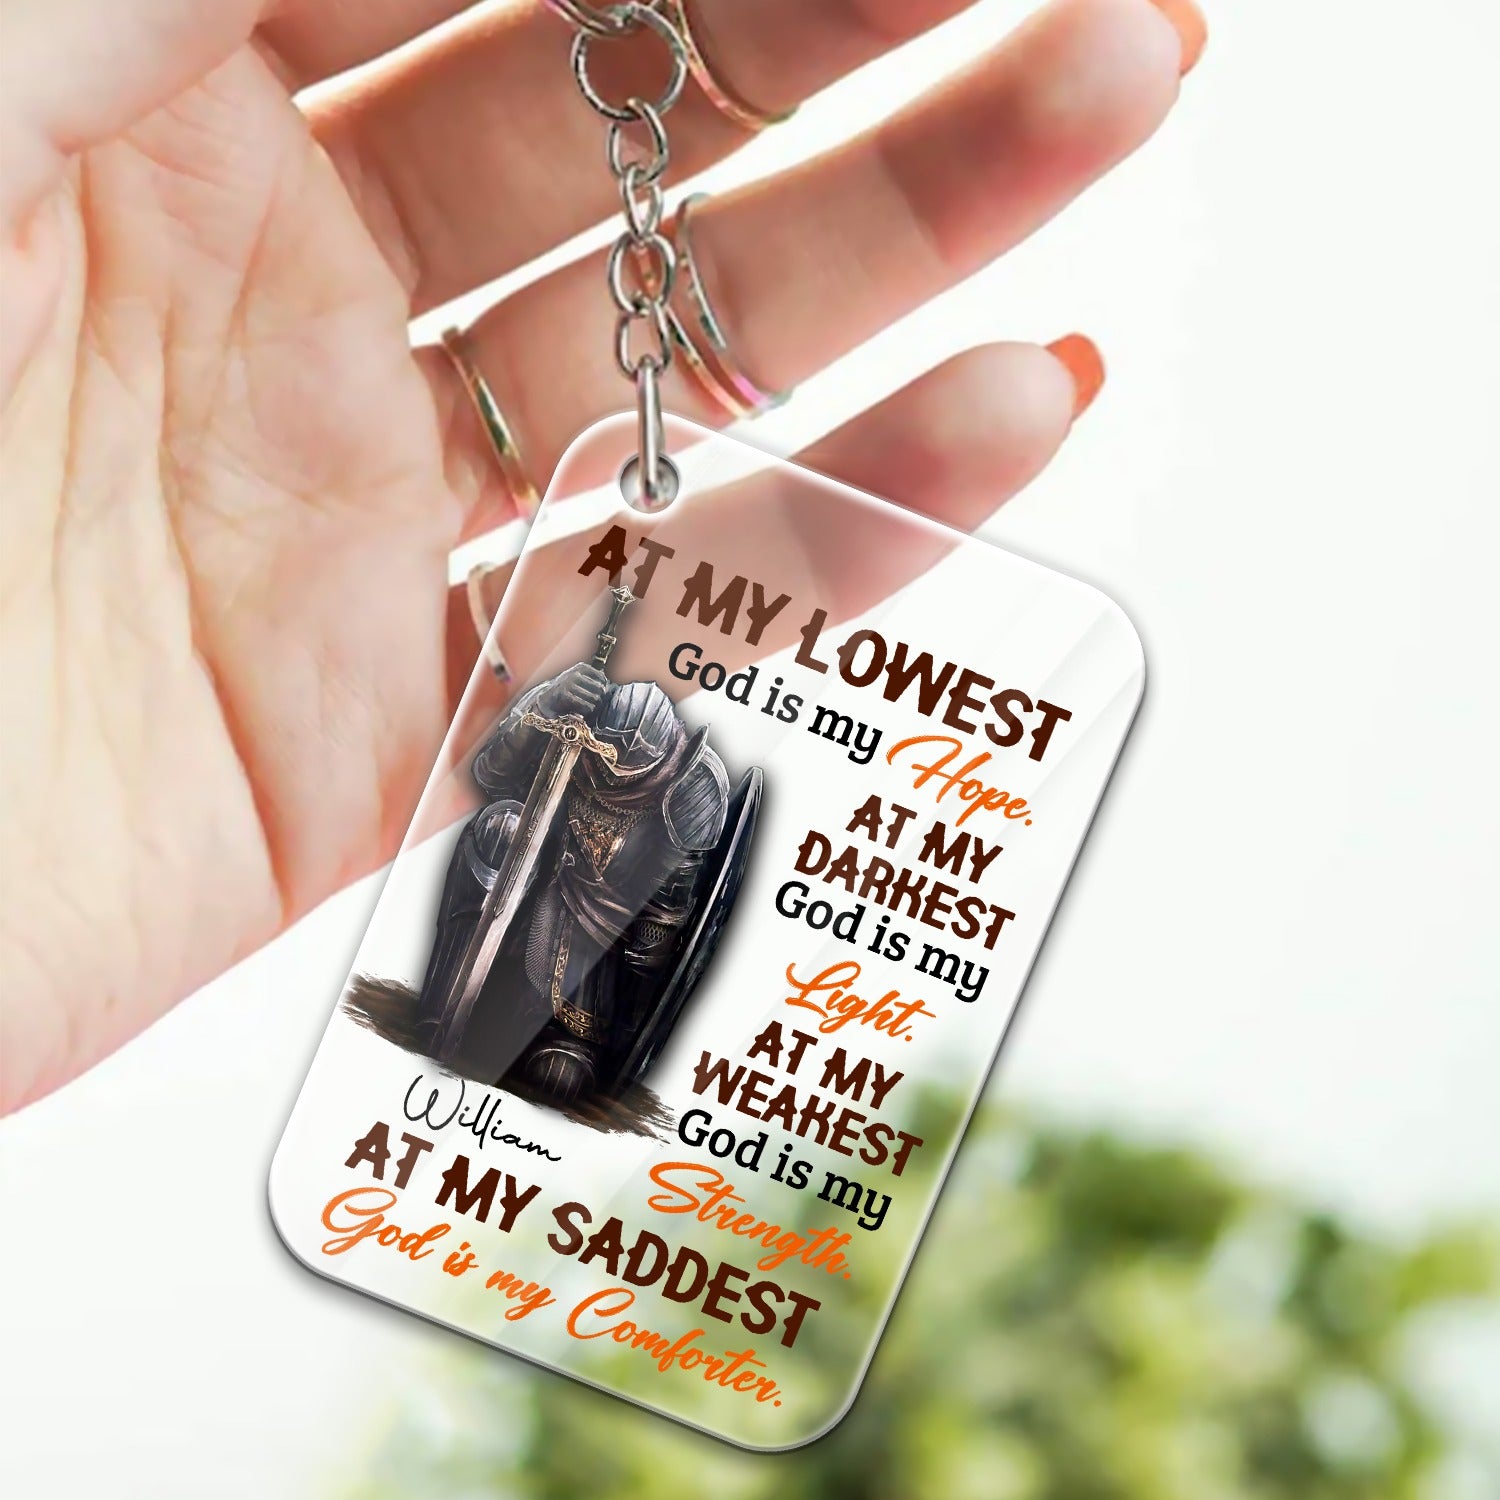 Personalized Man Warrior Of God At My Lowest God Is My Hope At My Darkest God Is My Light Acrylic Keychain